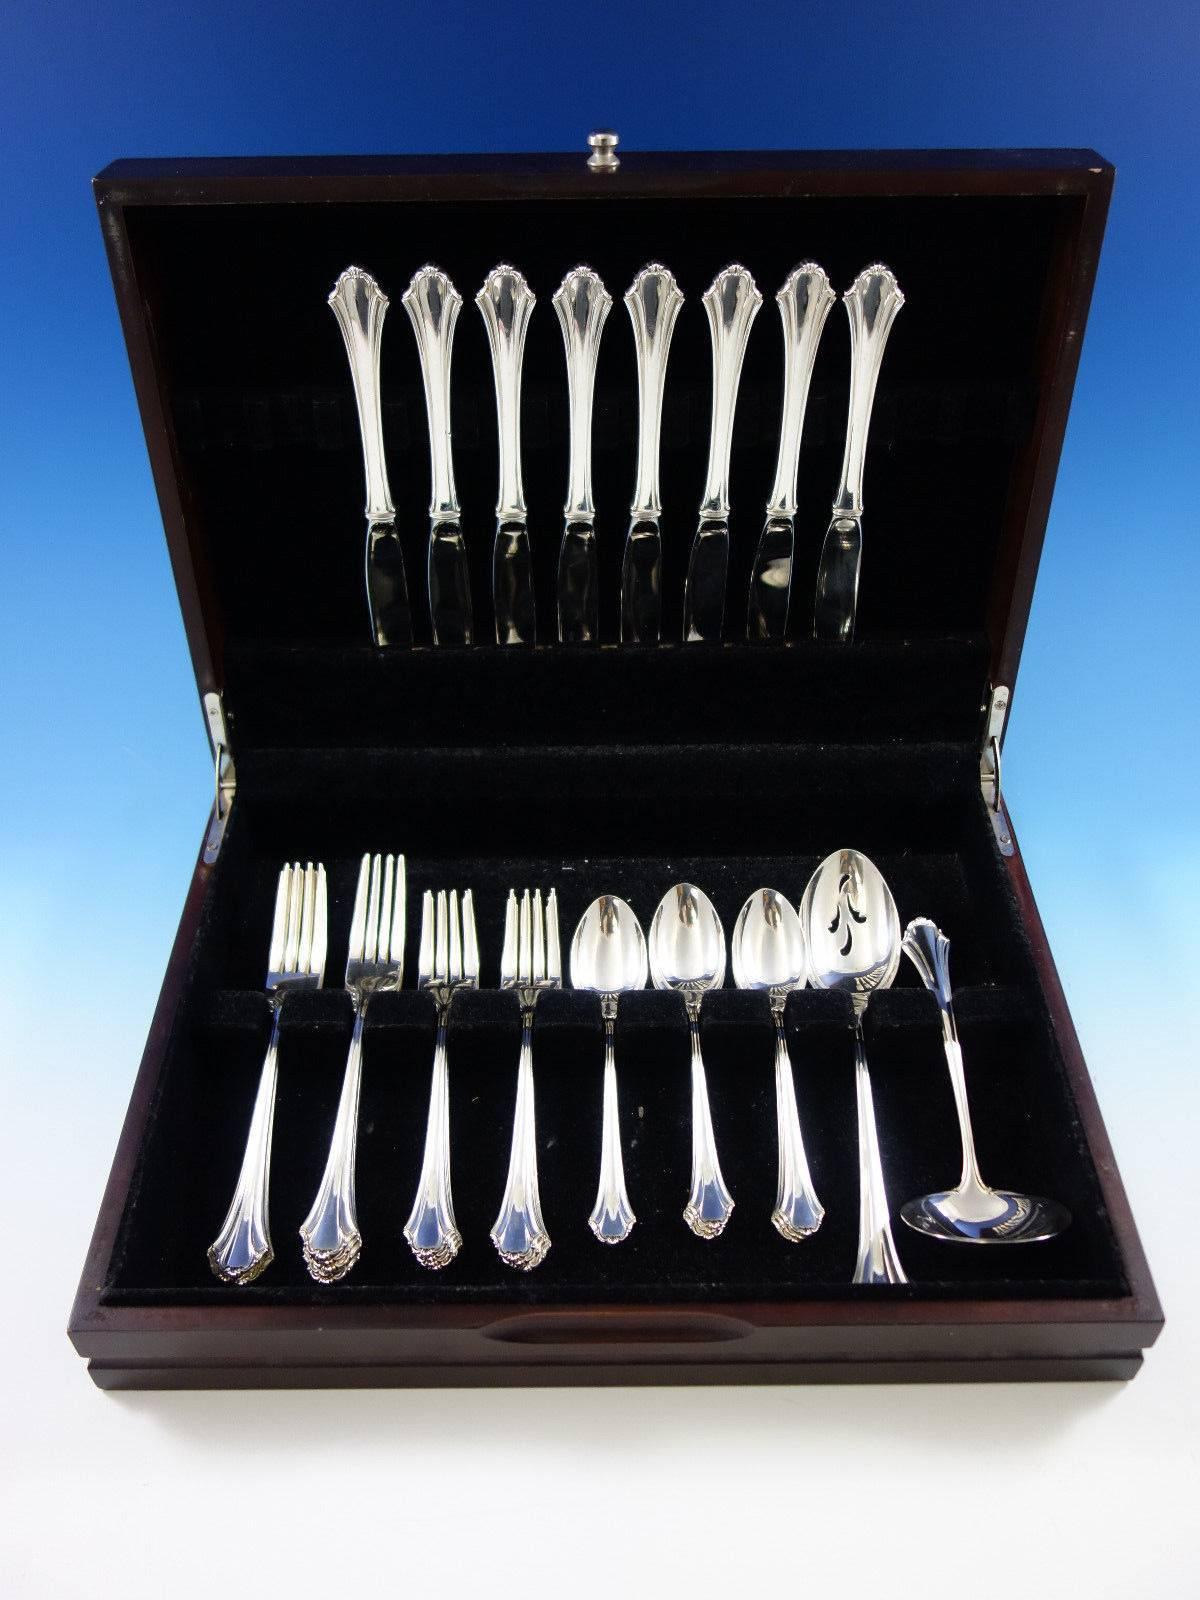 Bel Chateau by Lunt Sterling silver flatware set, 34 pieces. This set includes: Eight knives, 9